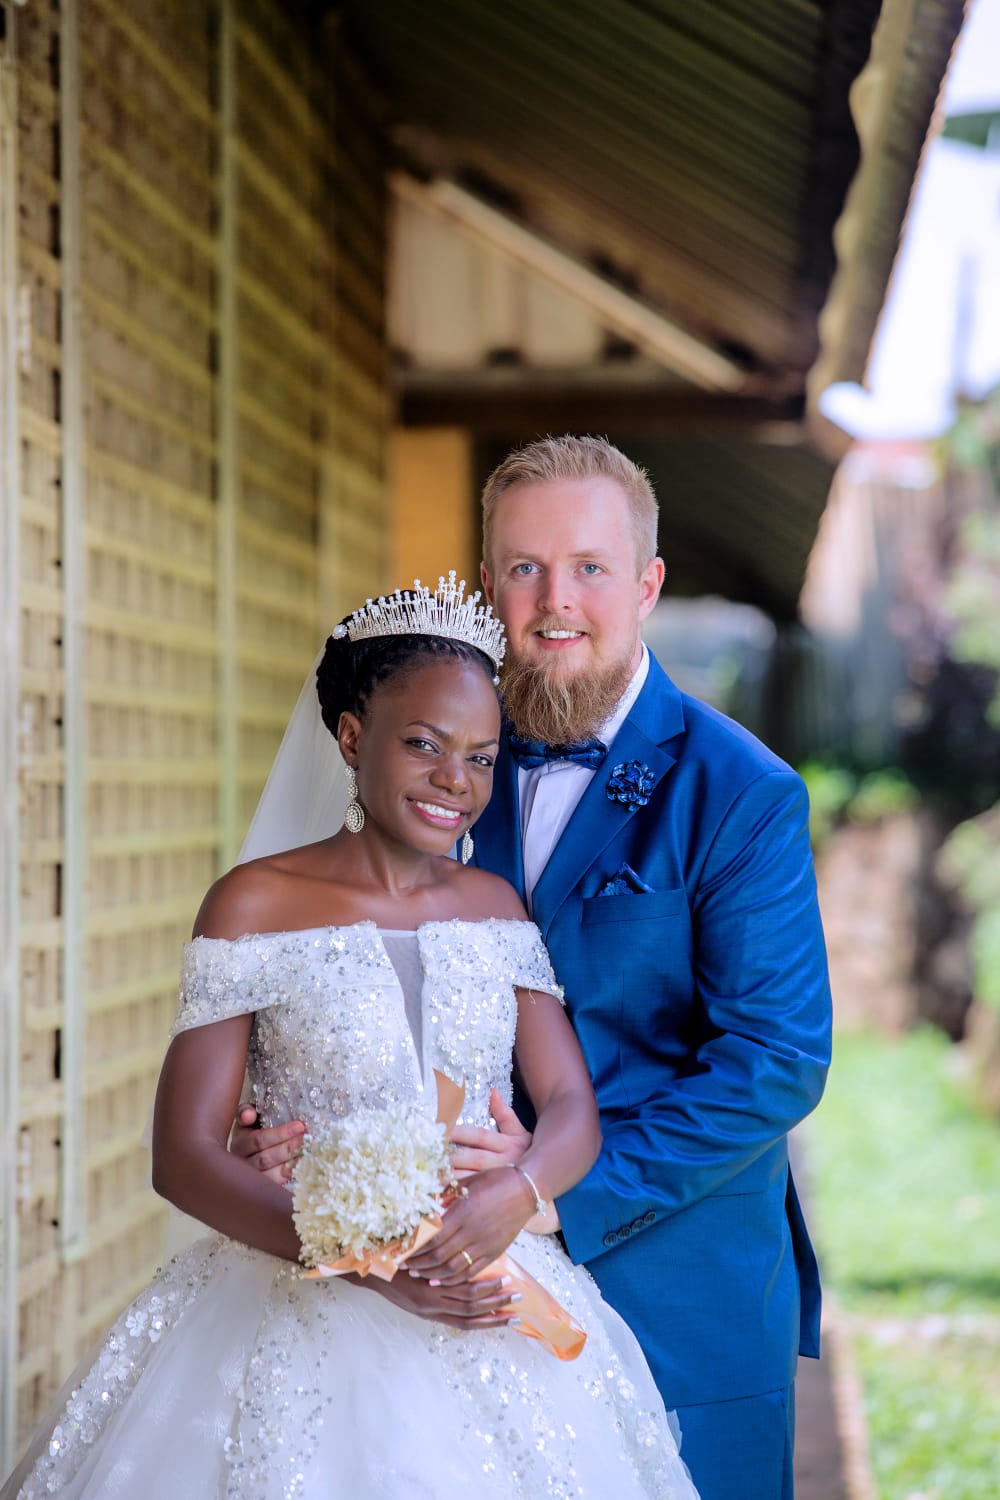 A young attractive interracial Christian couple pose outdoors on their wedding day